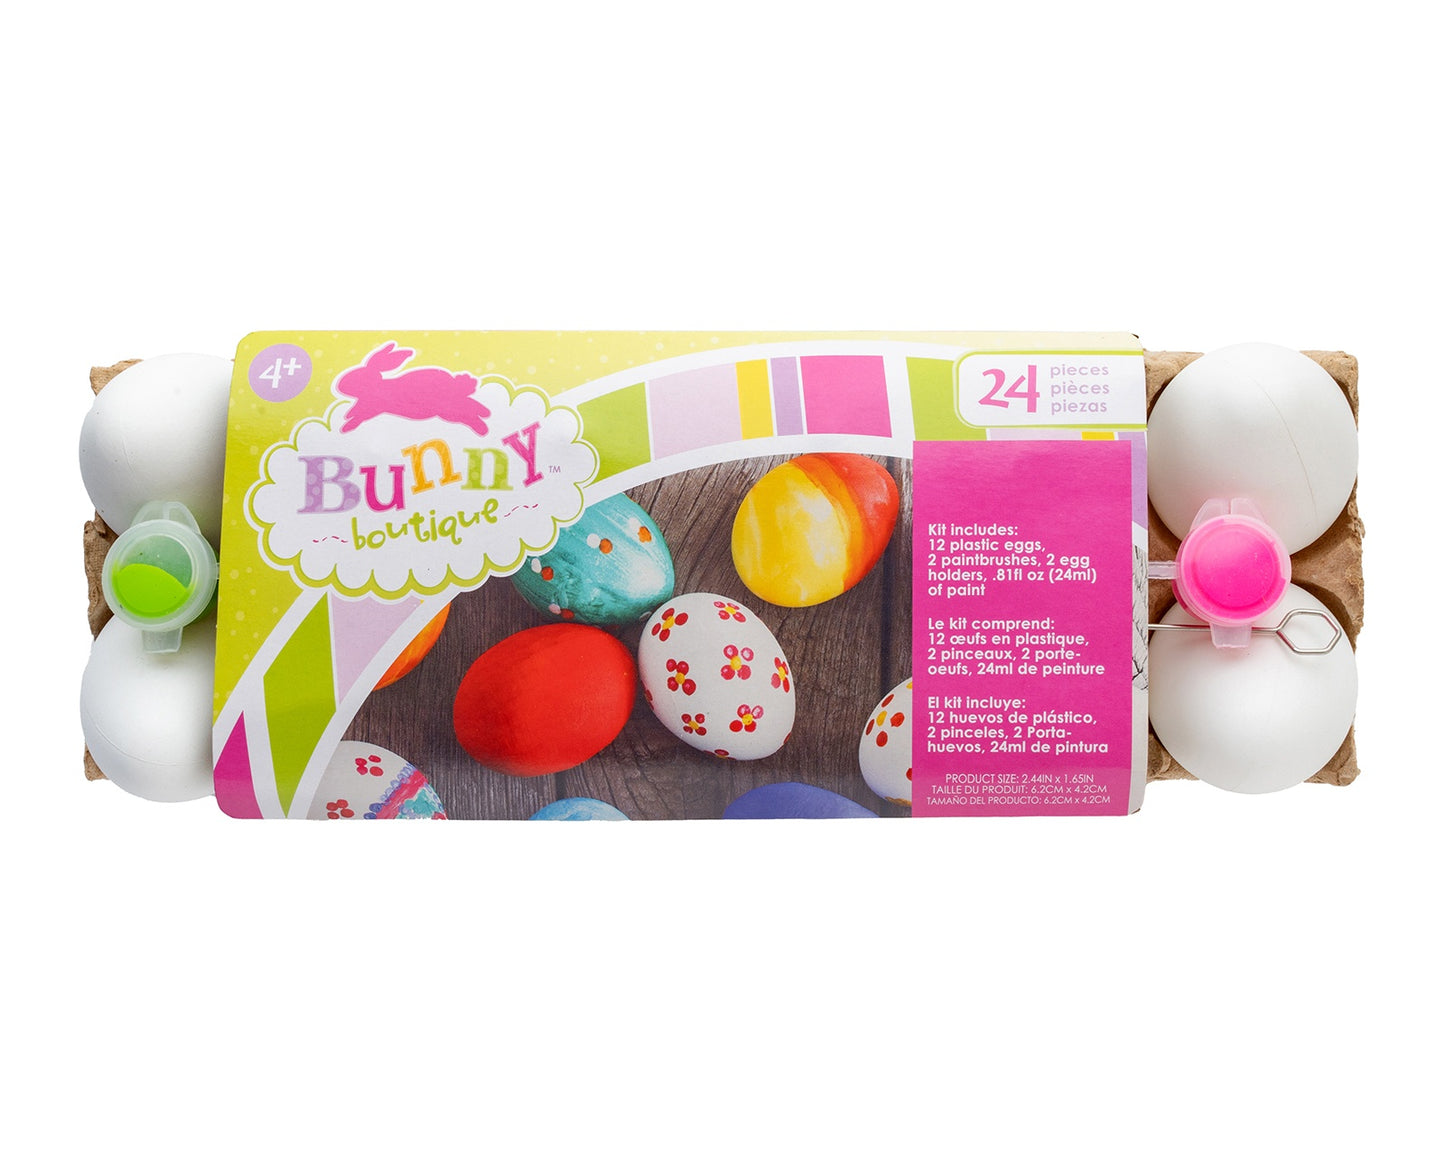 Colorbok Bunny Boutique Egg Painting Kit-Makes 12